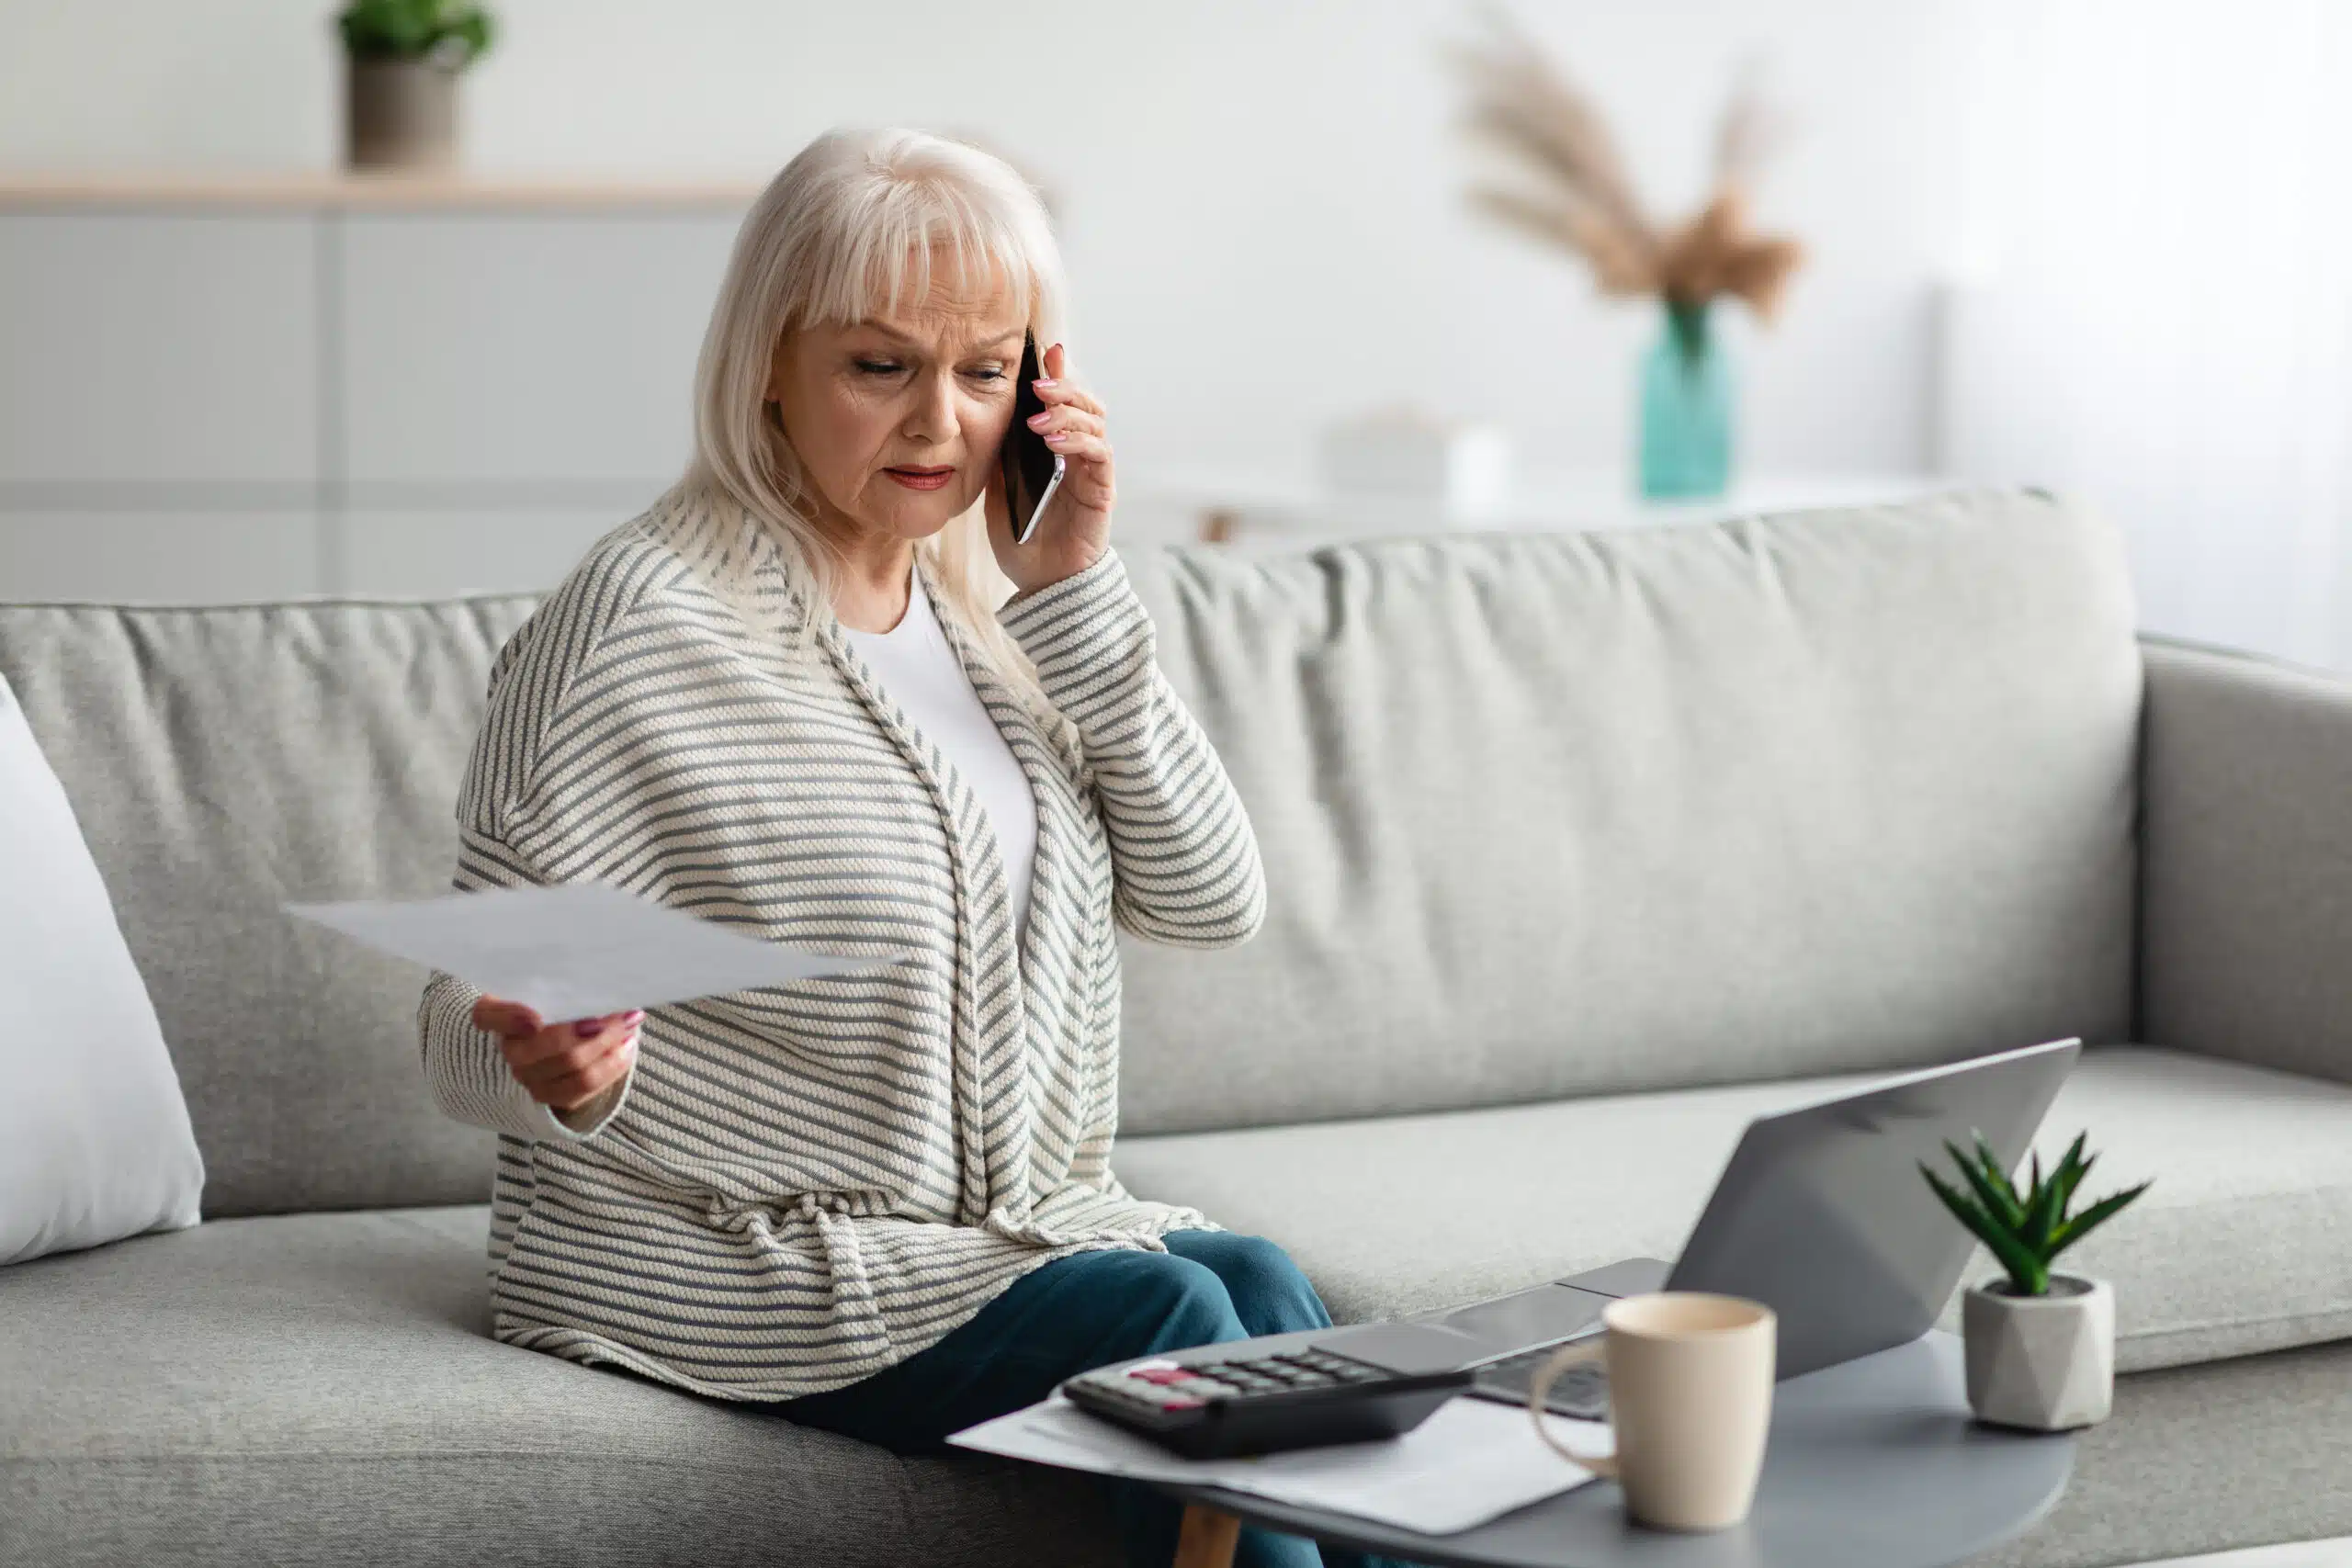 Older woman sitting while on the phone and confused about a paper she is holding while looking at her laptop